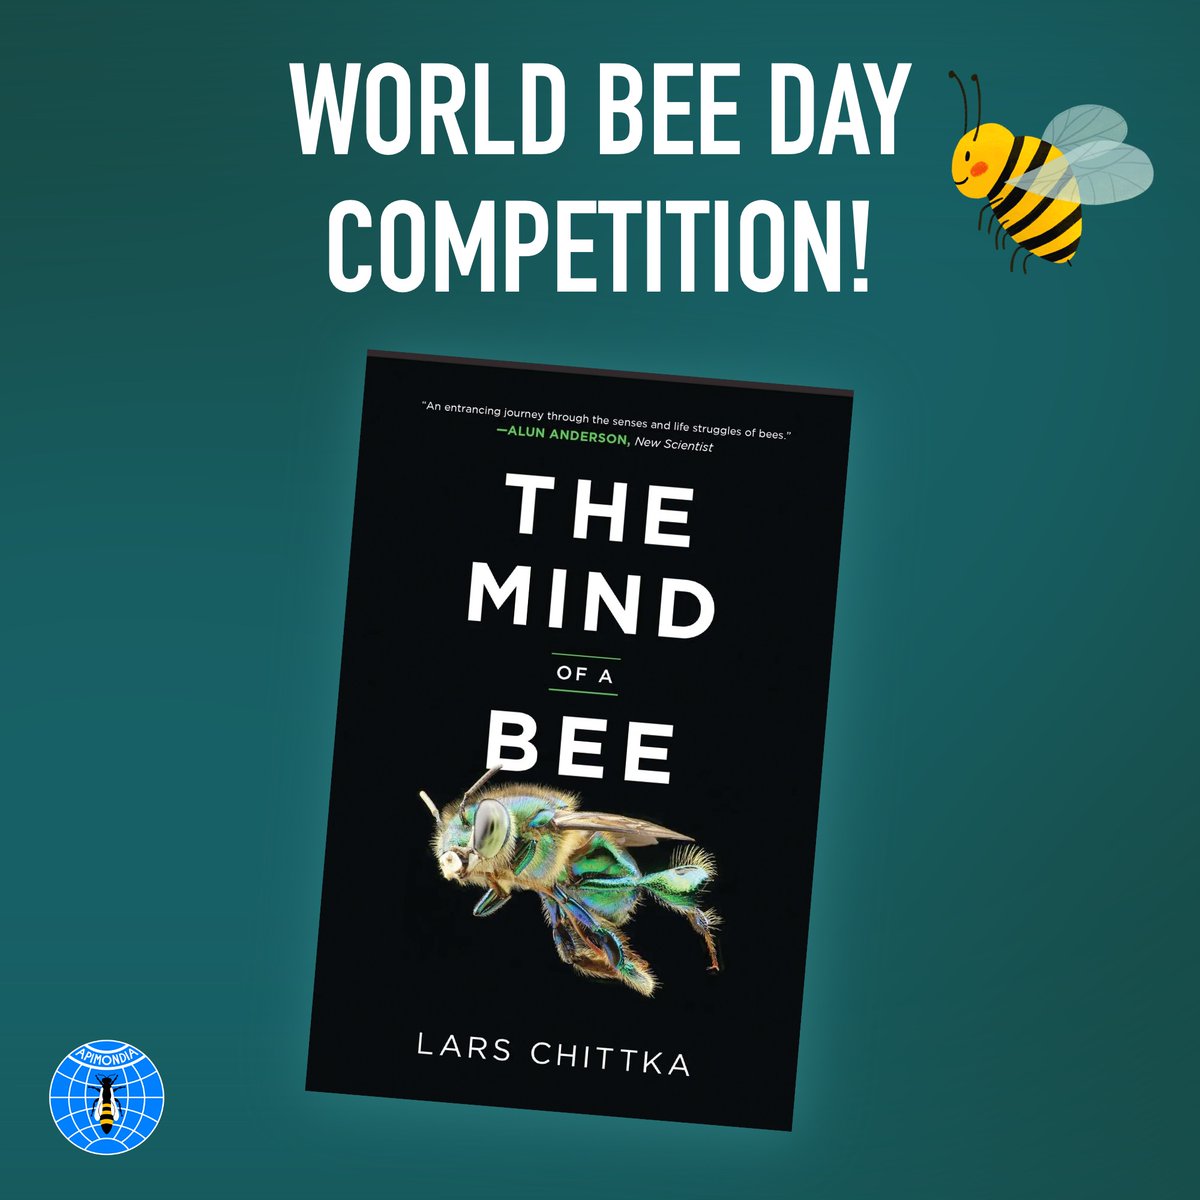 🐝#WorldBeeDay competition!

For a chance to win a copy of Lars Chittka's book The Mind of a Bee!       

🐝 Follow @Apimondia and @LChittka 
🐝 Like this post
🐝Tag a friend in the comments below

* UK/EU address only 
* Closes midnight 19 May 2024